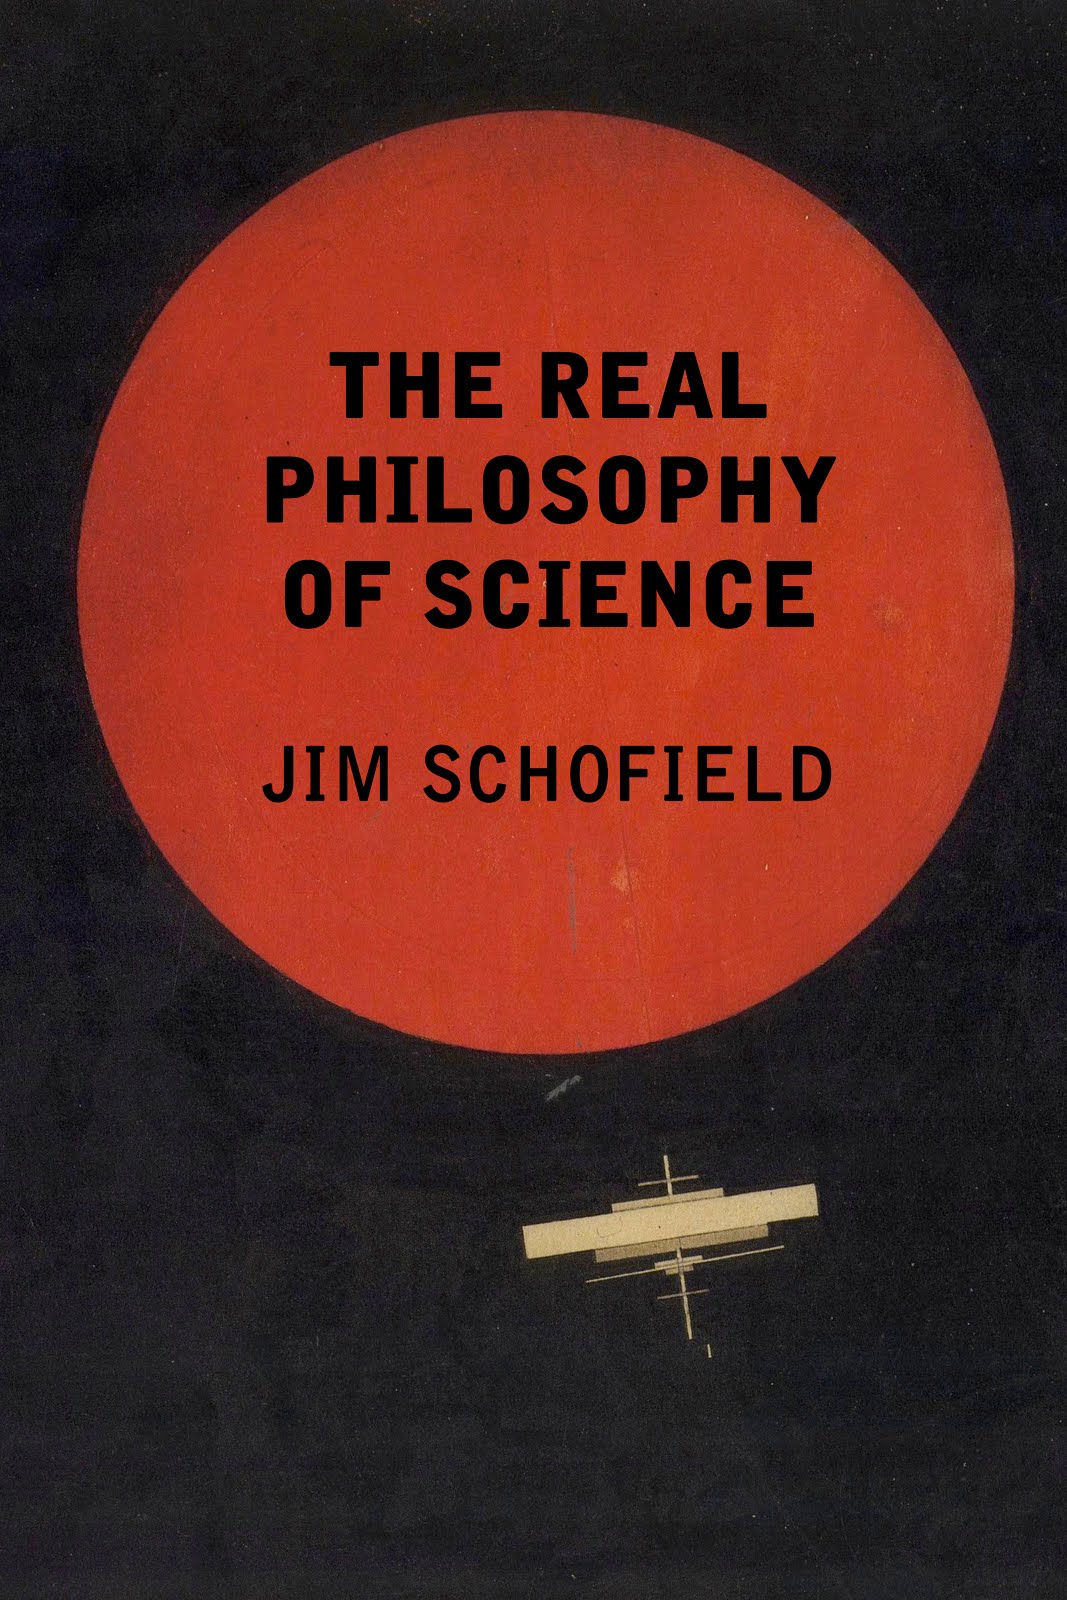 The Real Philosophy of Science